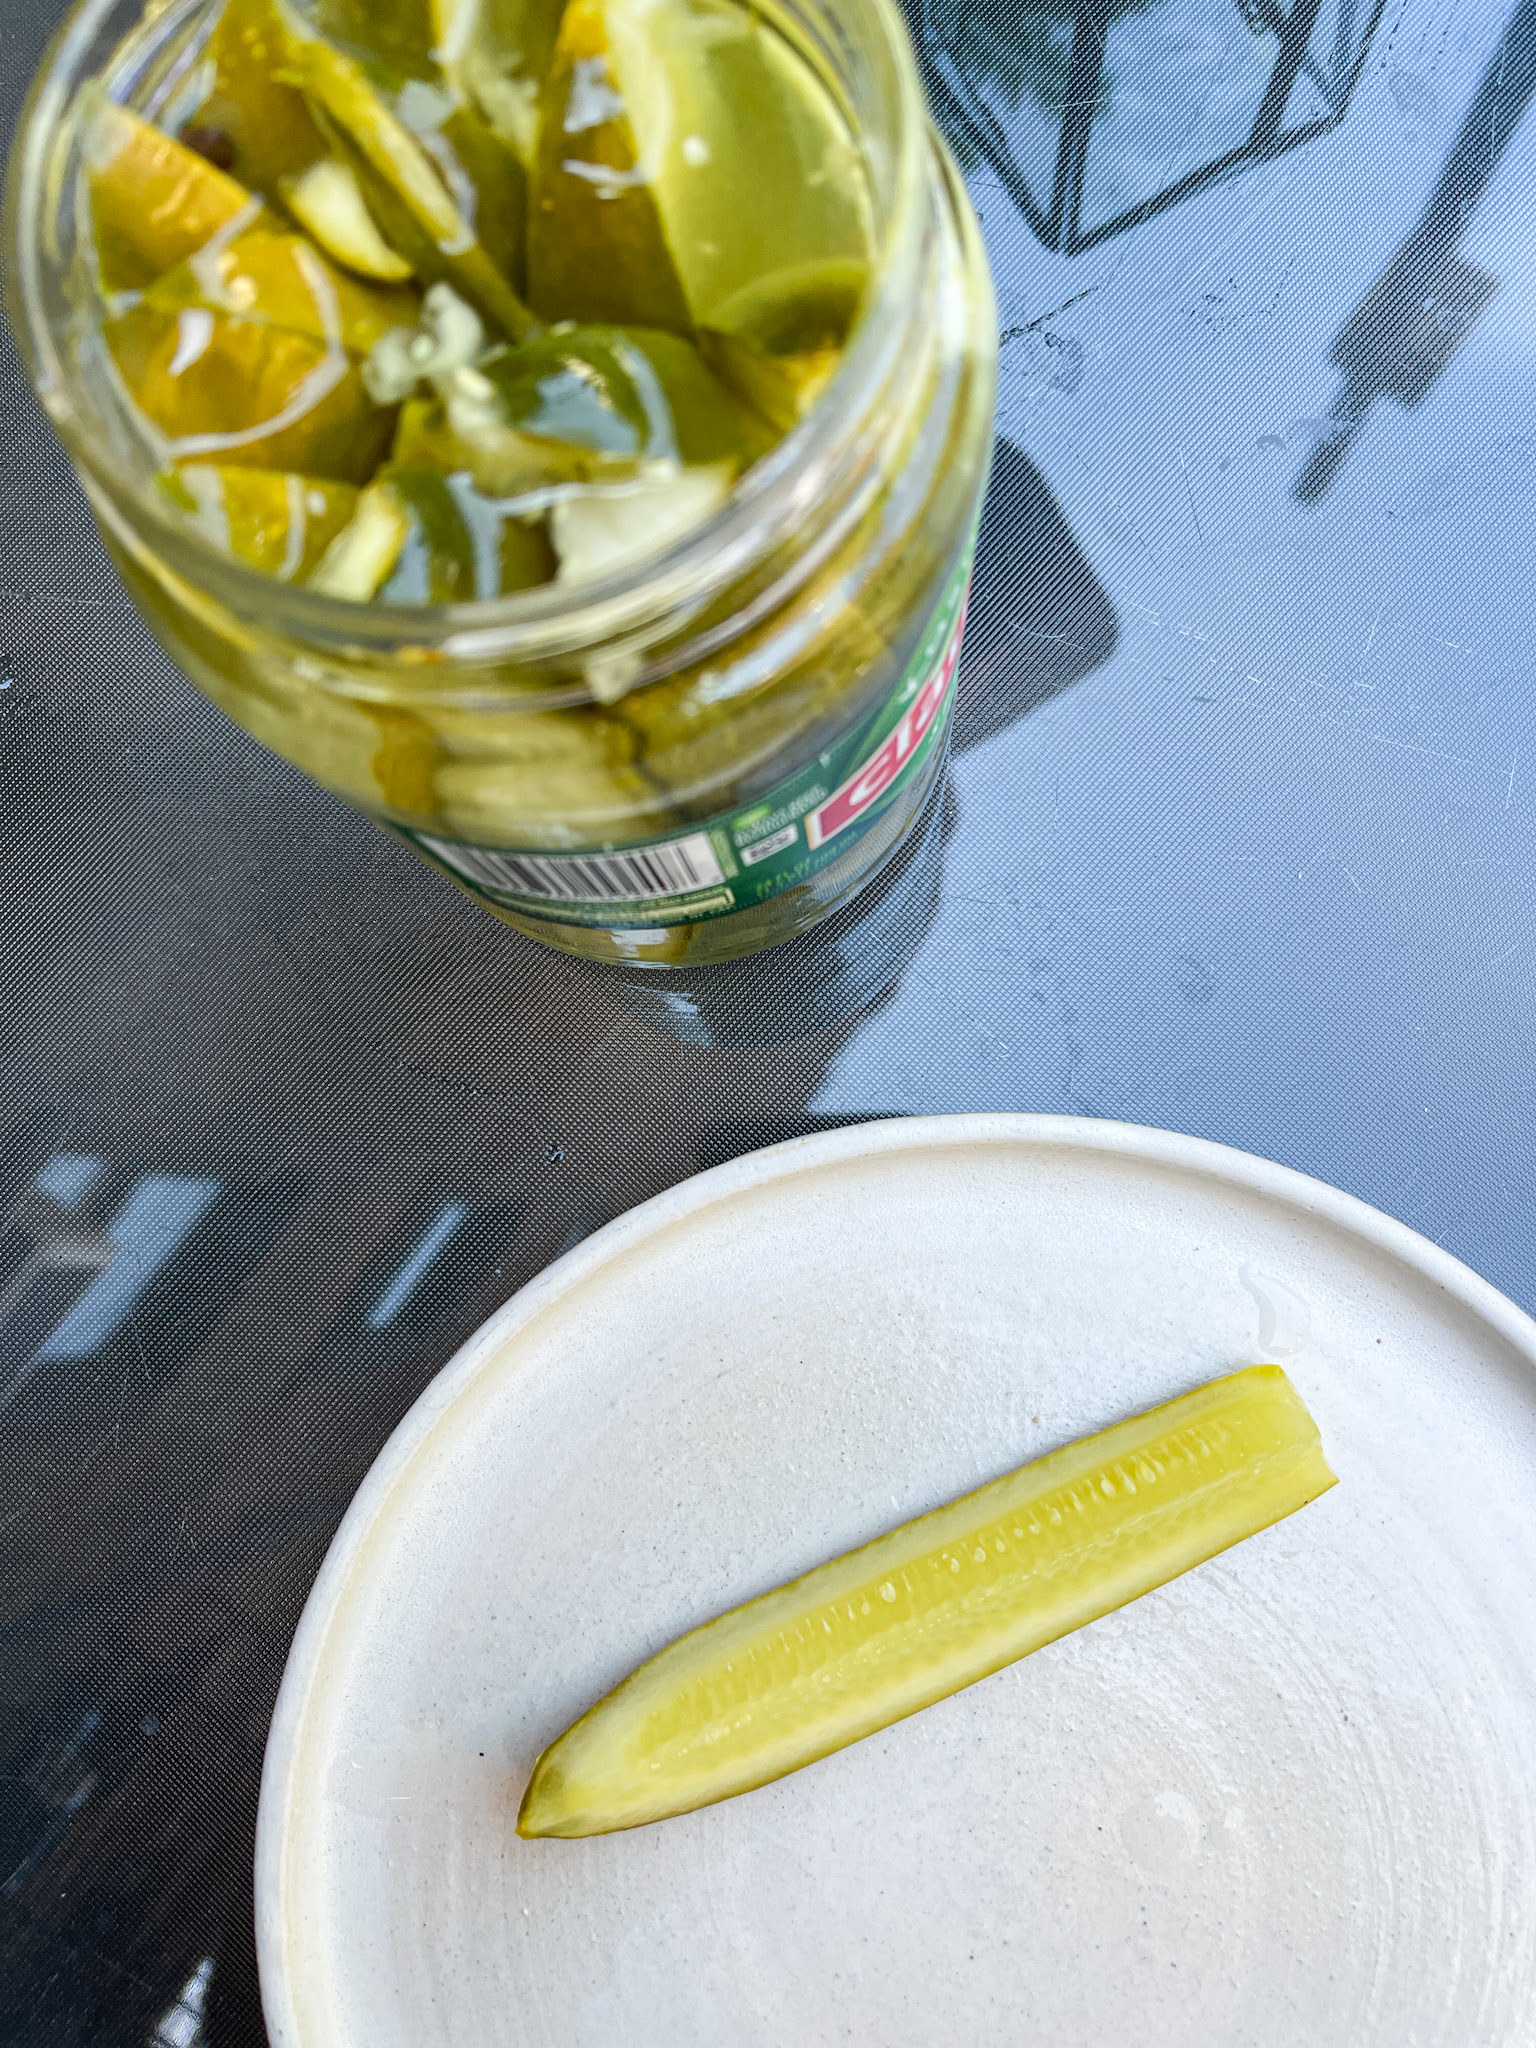 I also gave these pickles a flavor score of 10 because they really deserved...